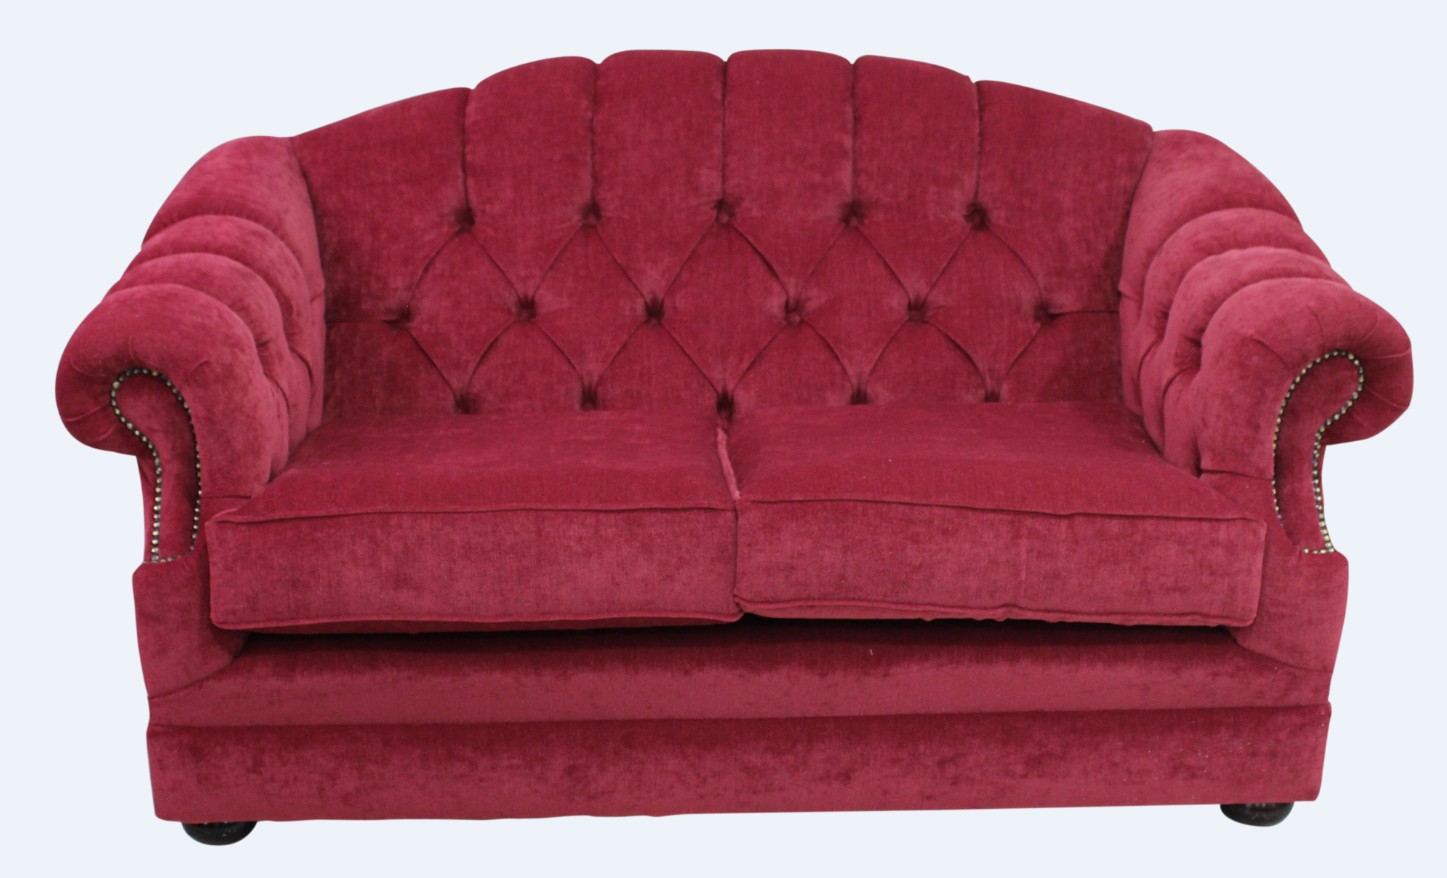 The Luxury Equation Understanding the Premium Price of Chesterfield Sofas  %Post Title